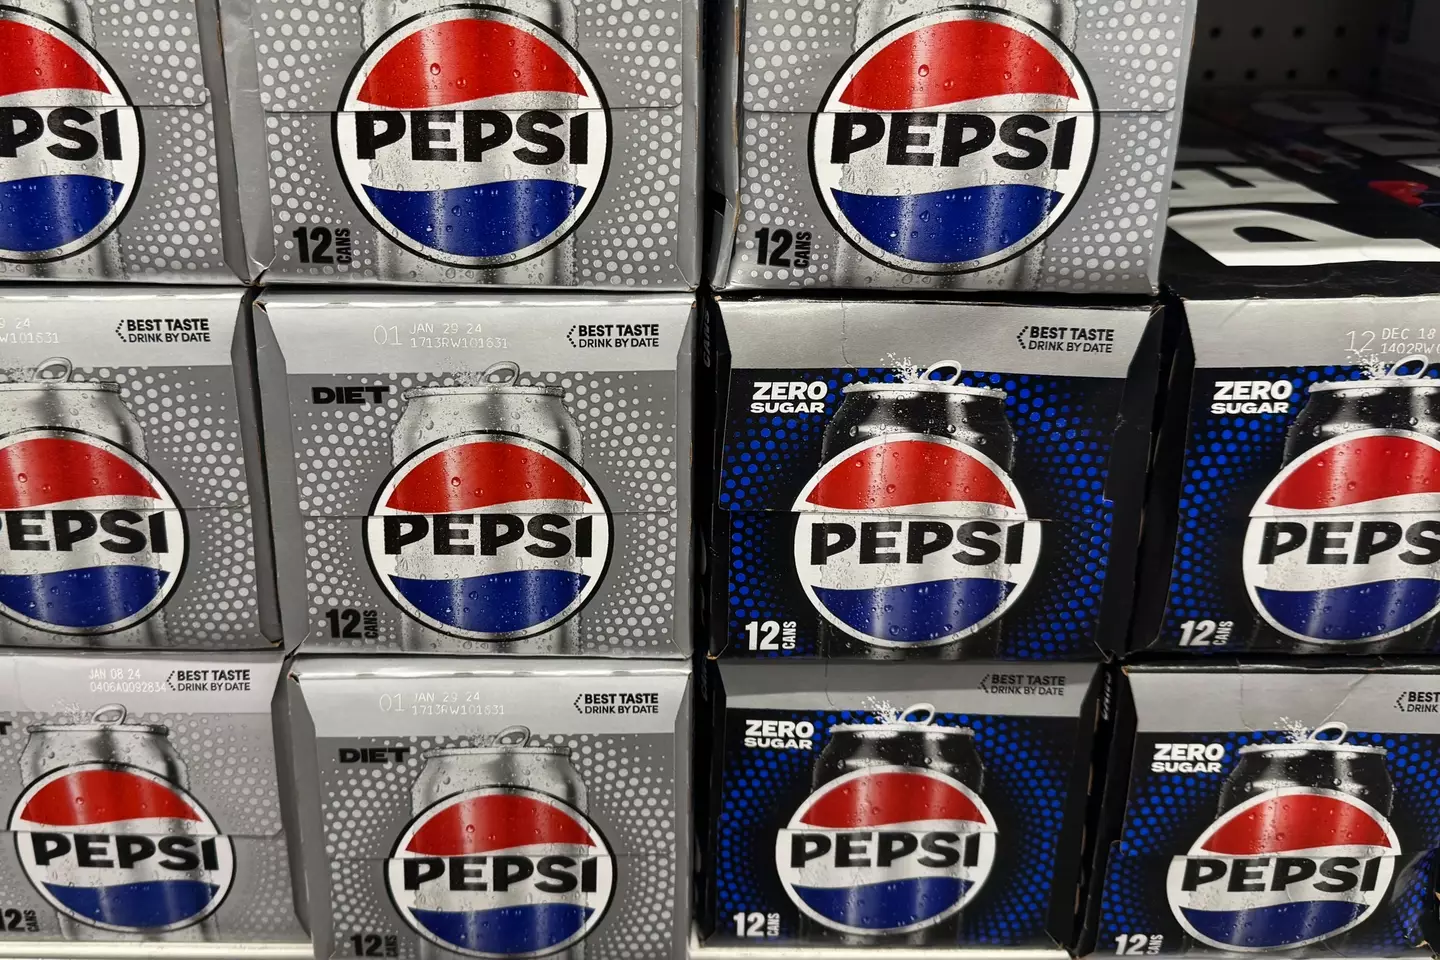 Pepsi was created to help people's digestion.